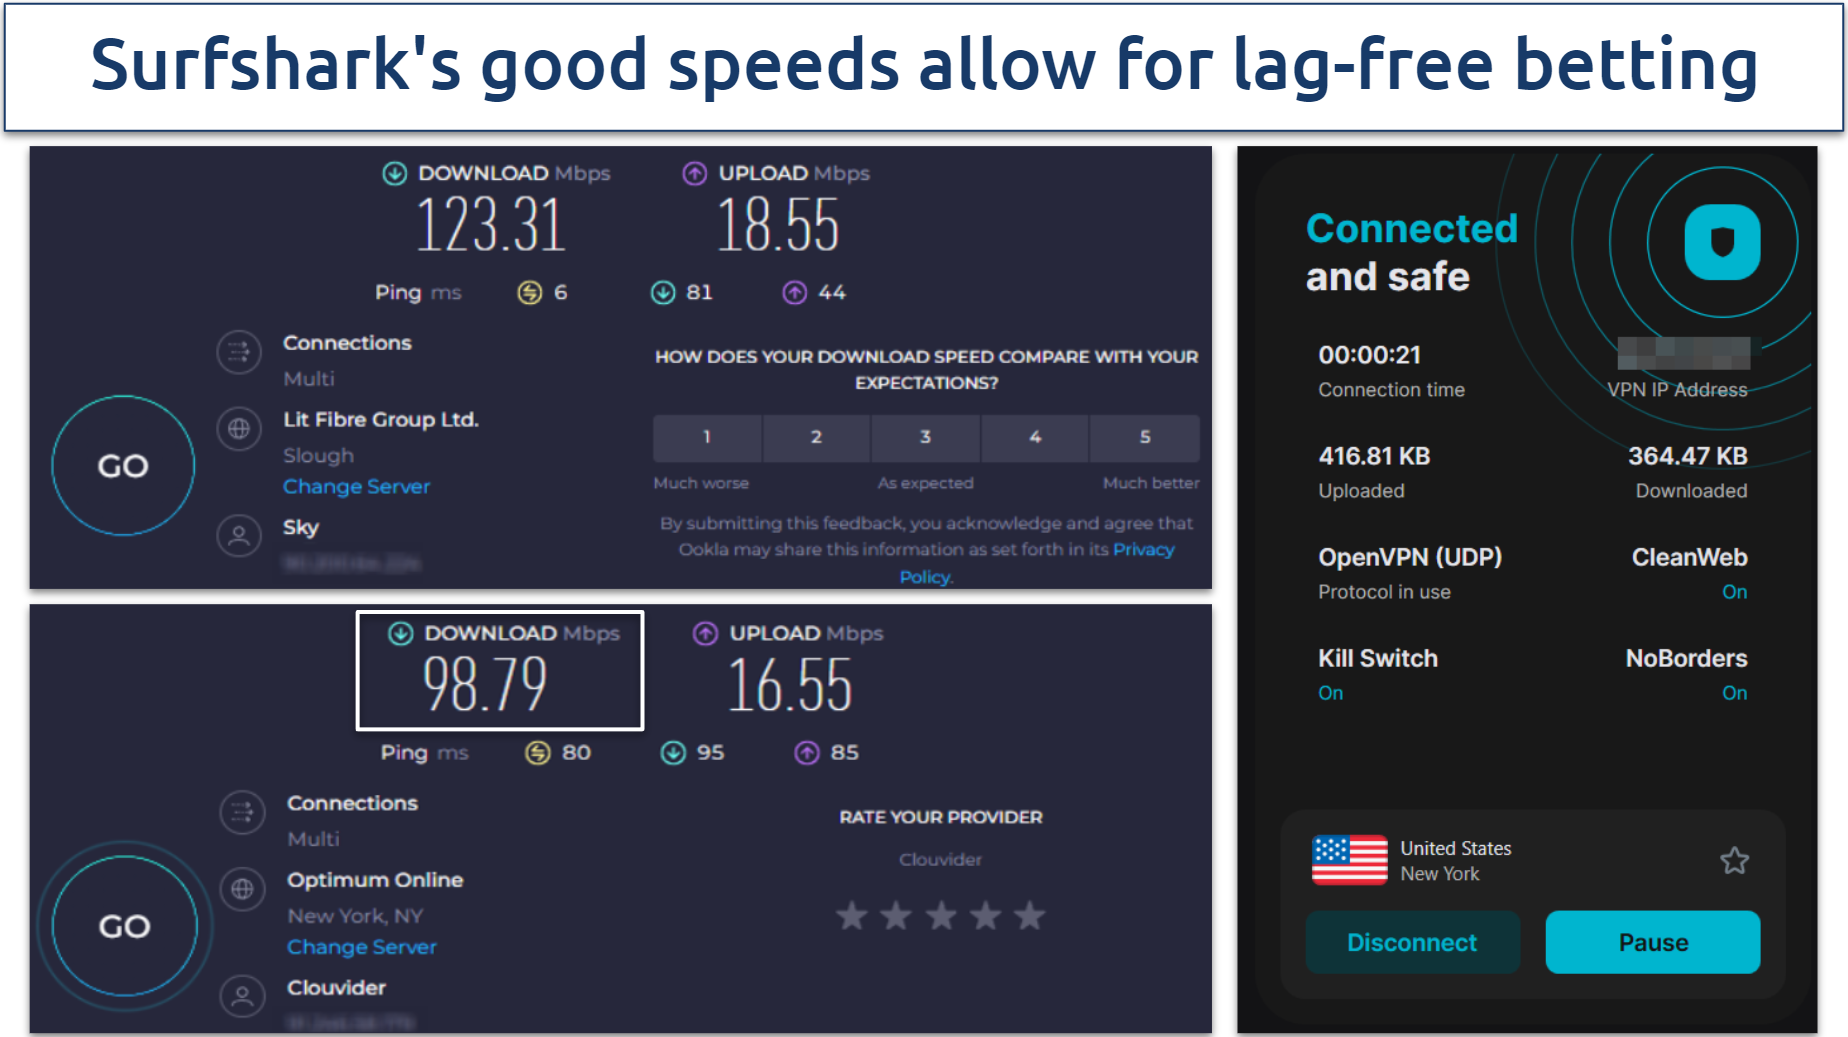 Screenshot showing the speed results of Surfshark NY server